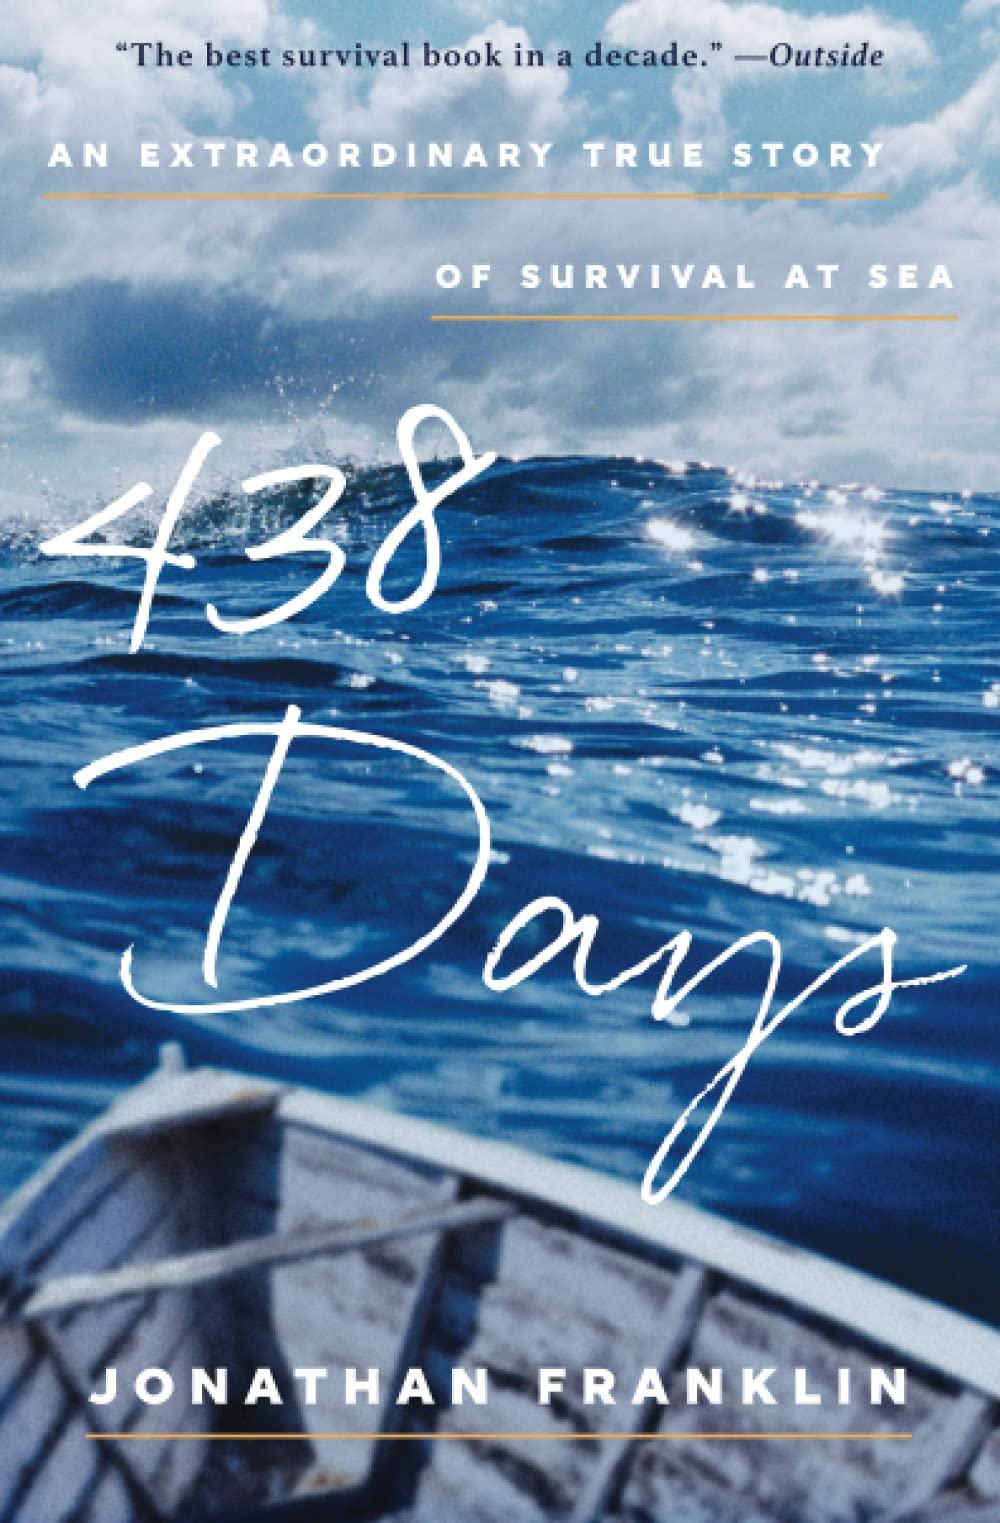 Image for "438 Days"